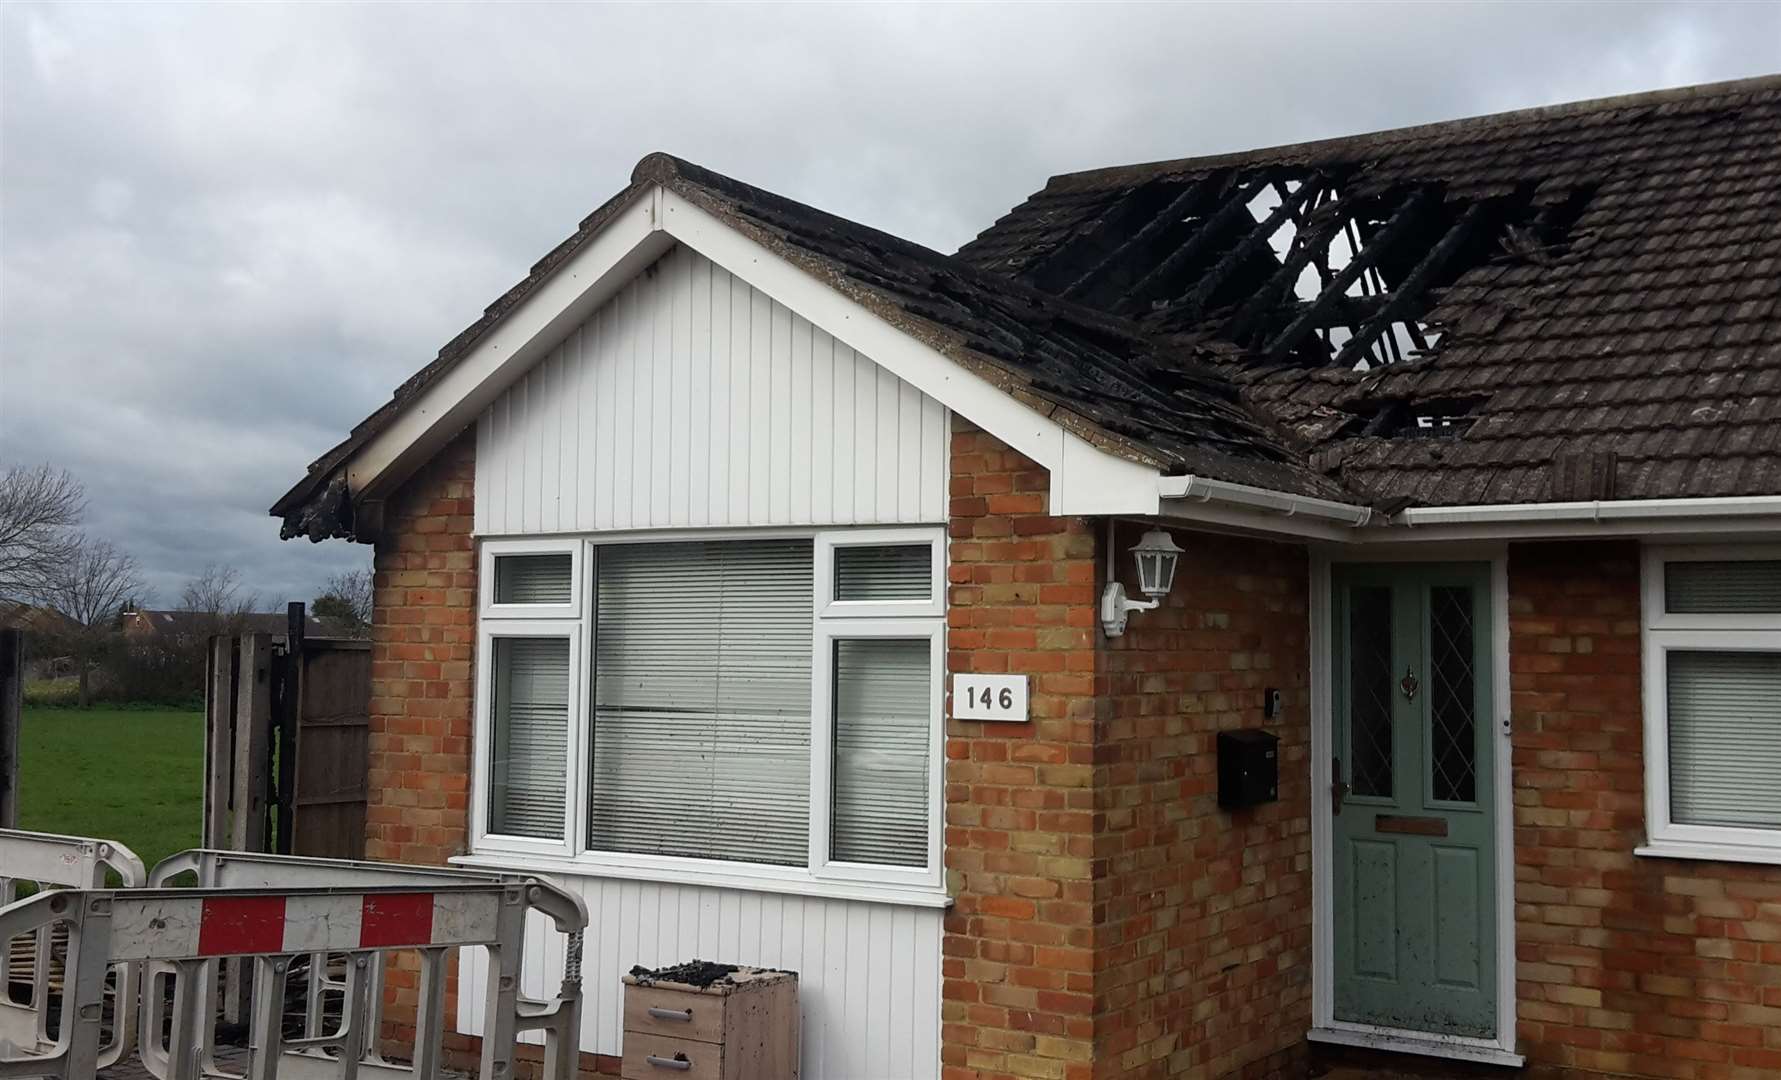 Barry Sawyer and Eileen Nivison's home went up in flames